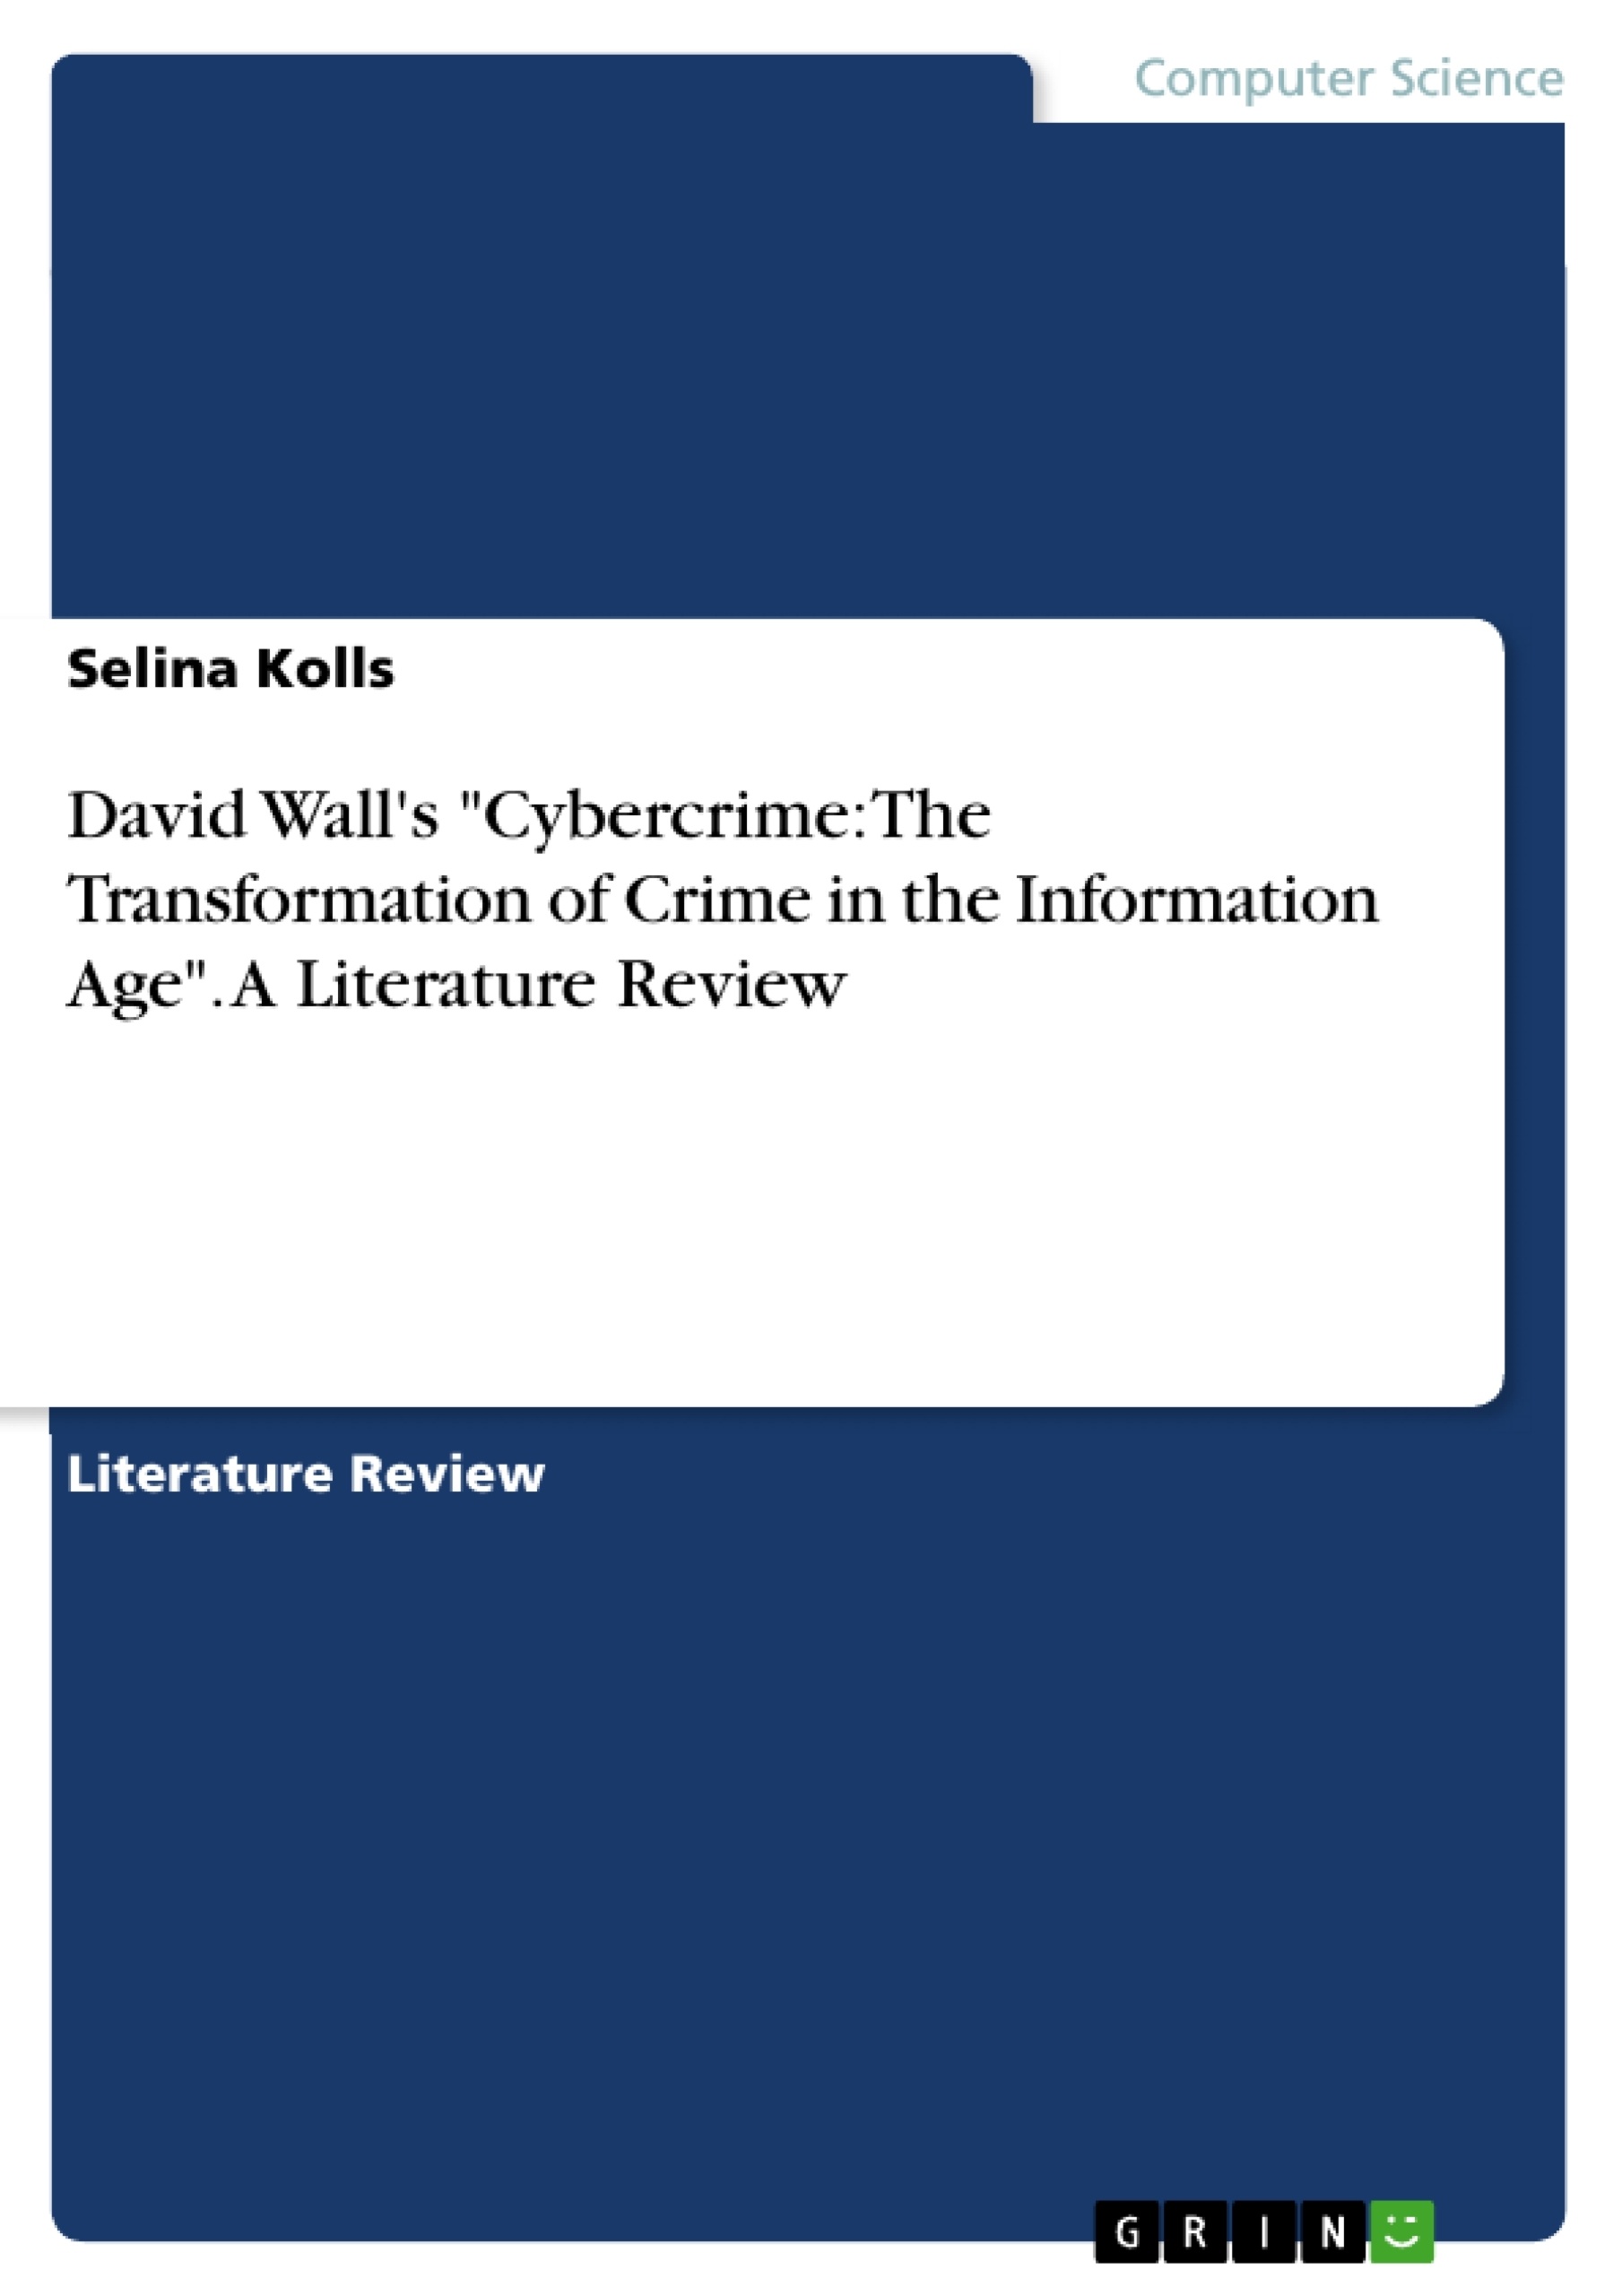 Titre: David Wall's "Cybercrime: The Transformation of Crime in the Information Age". A Literature Review